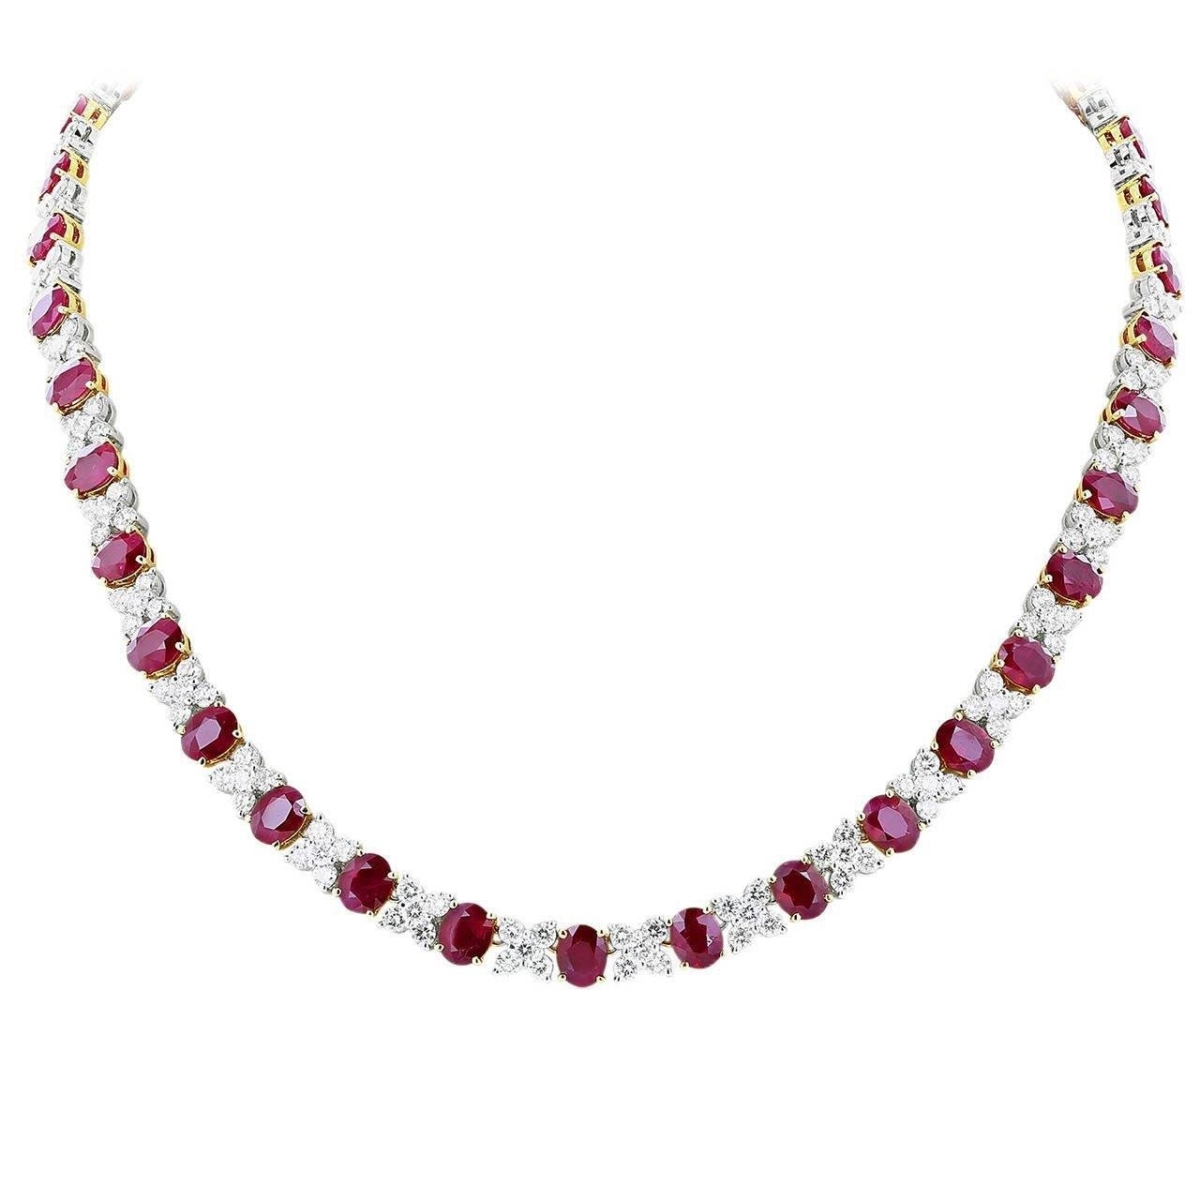 Picture of Harry Chad Enterprises 61857 14K White Gold 32 CT Oval Ruby with Round Diamonds Necklace